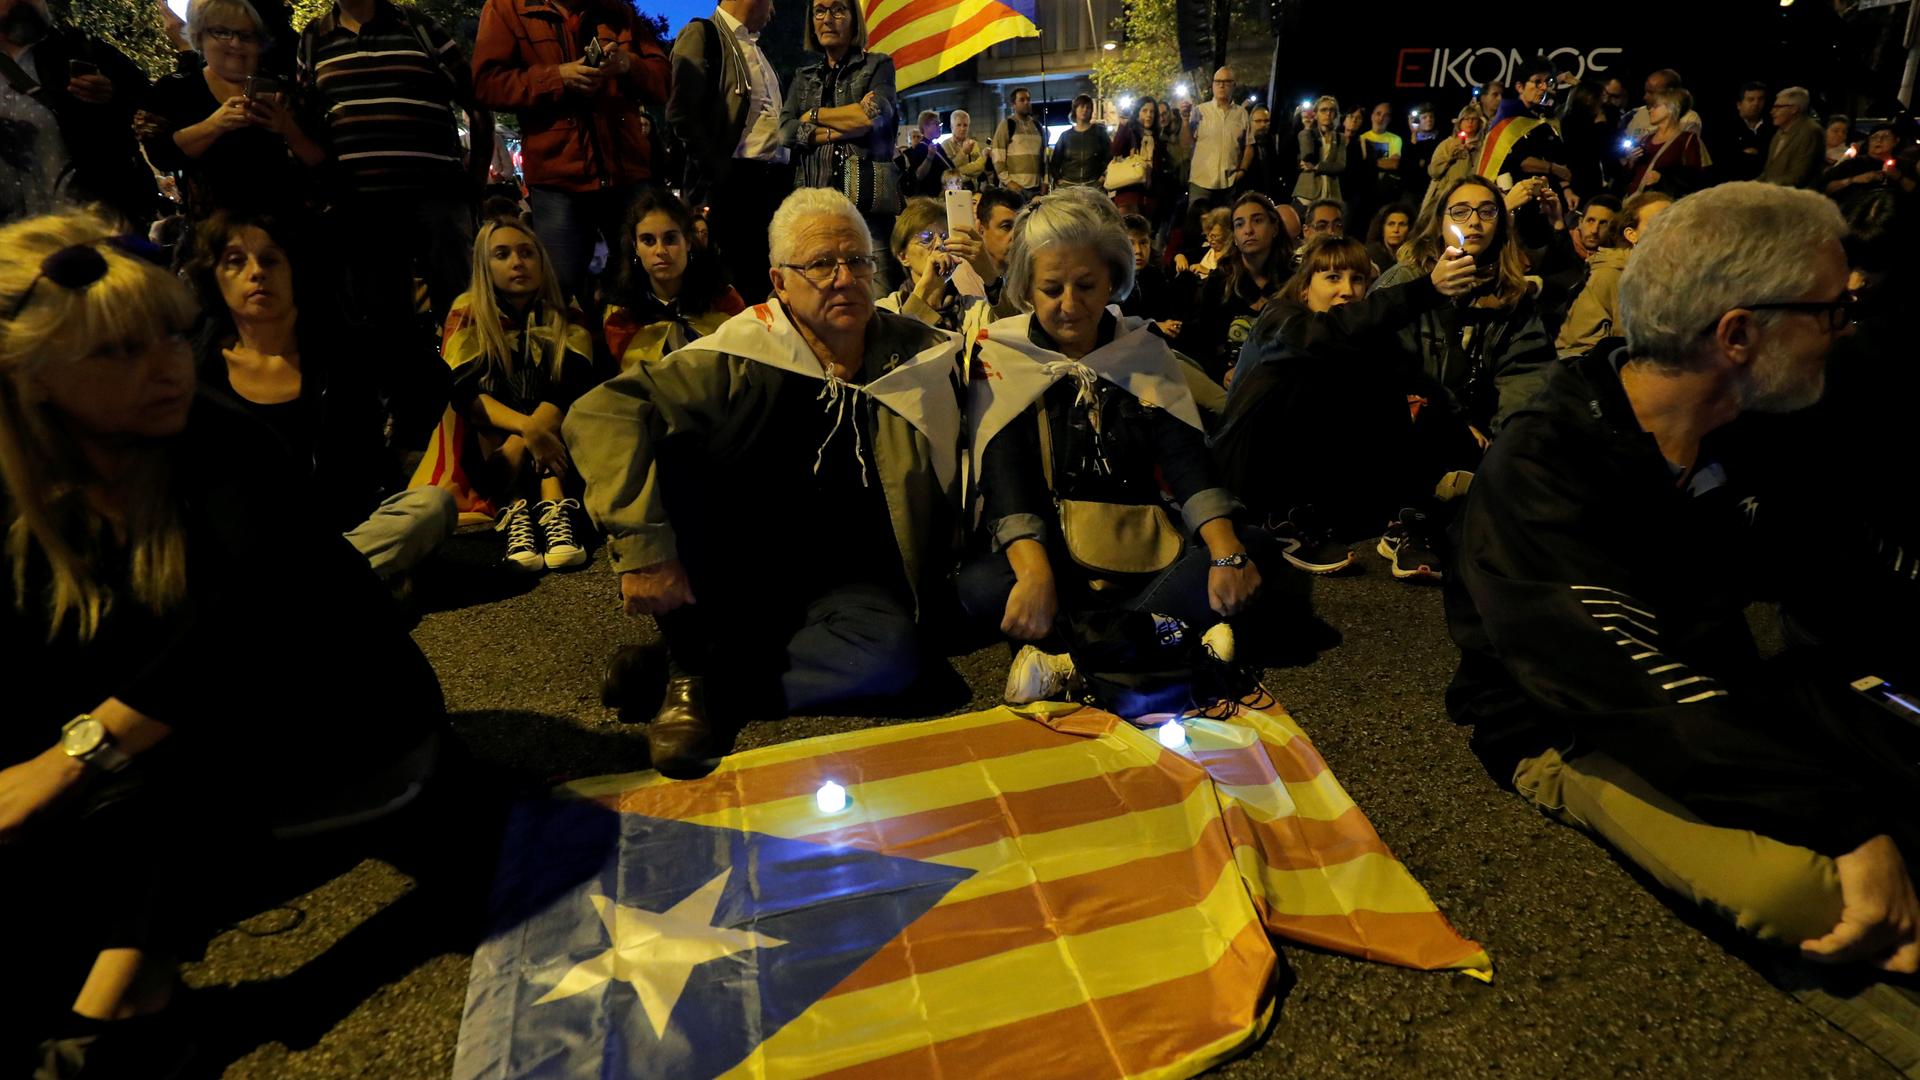 A group of people gather around a flag in a night-time protest with low lights